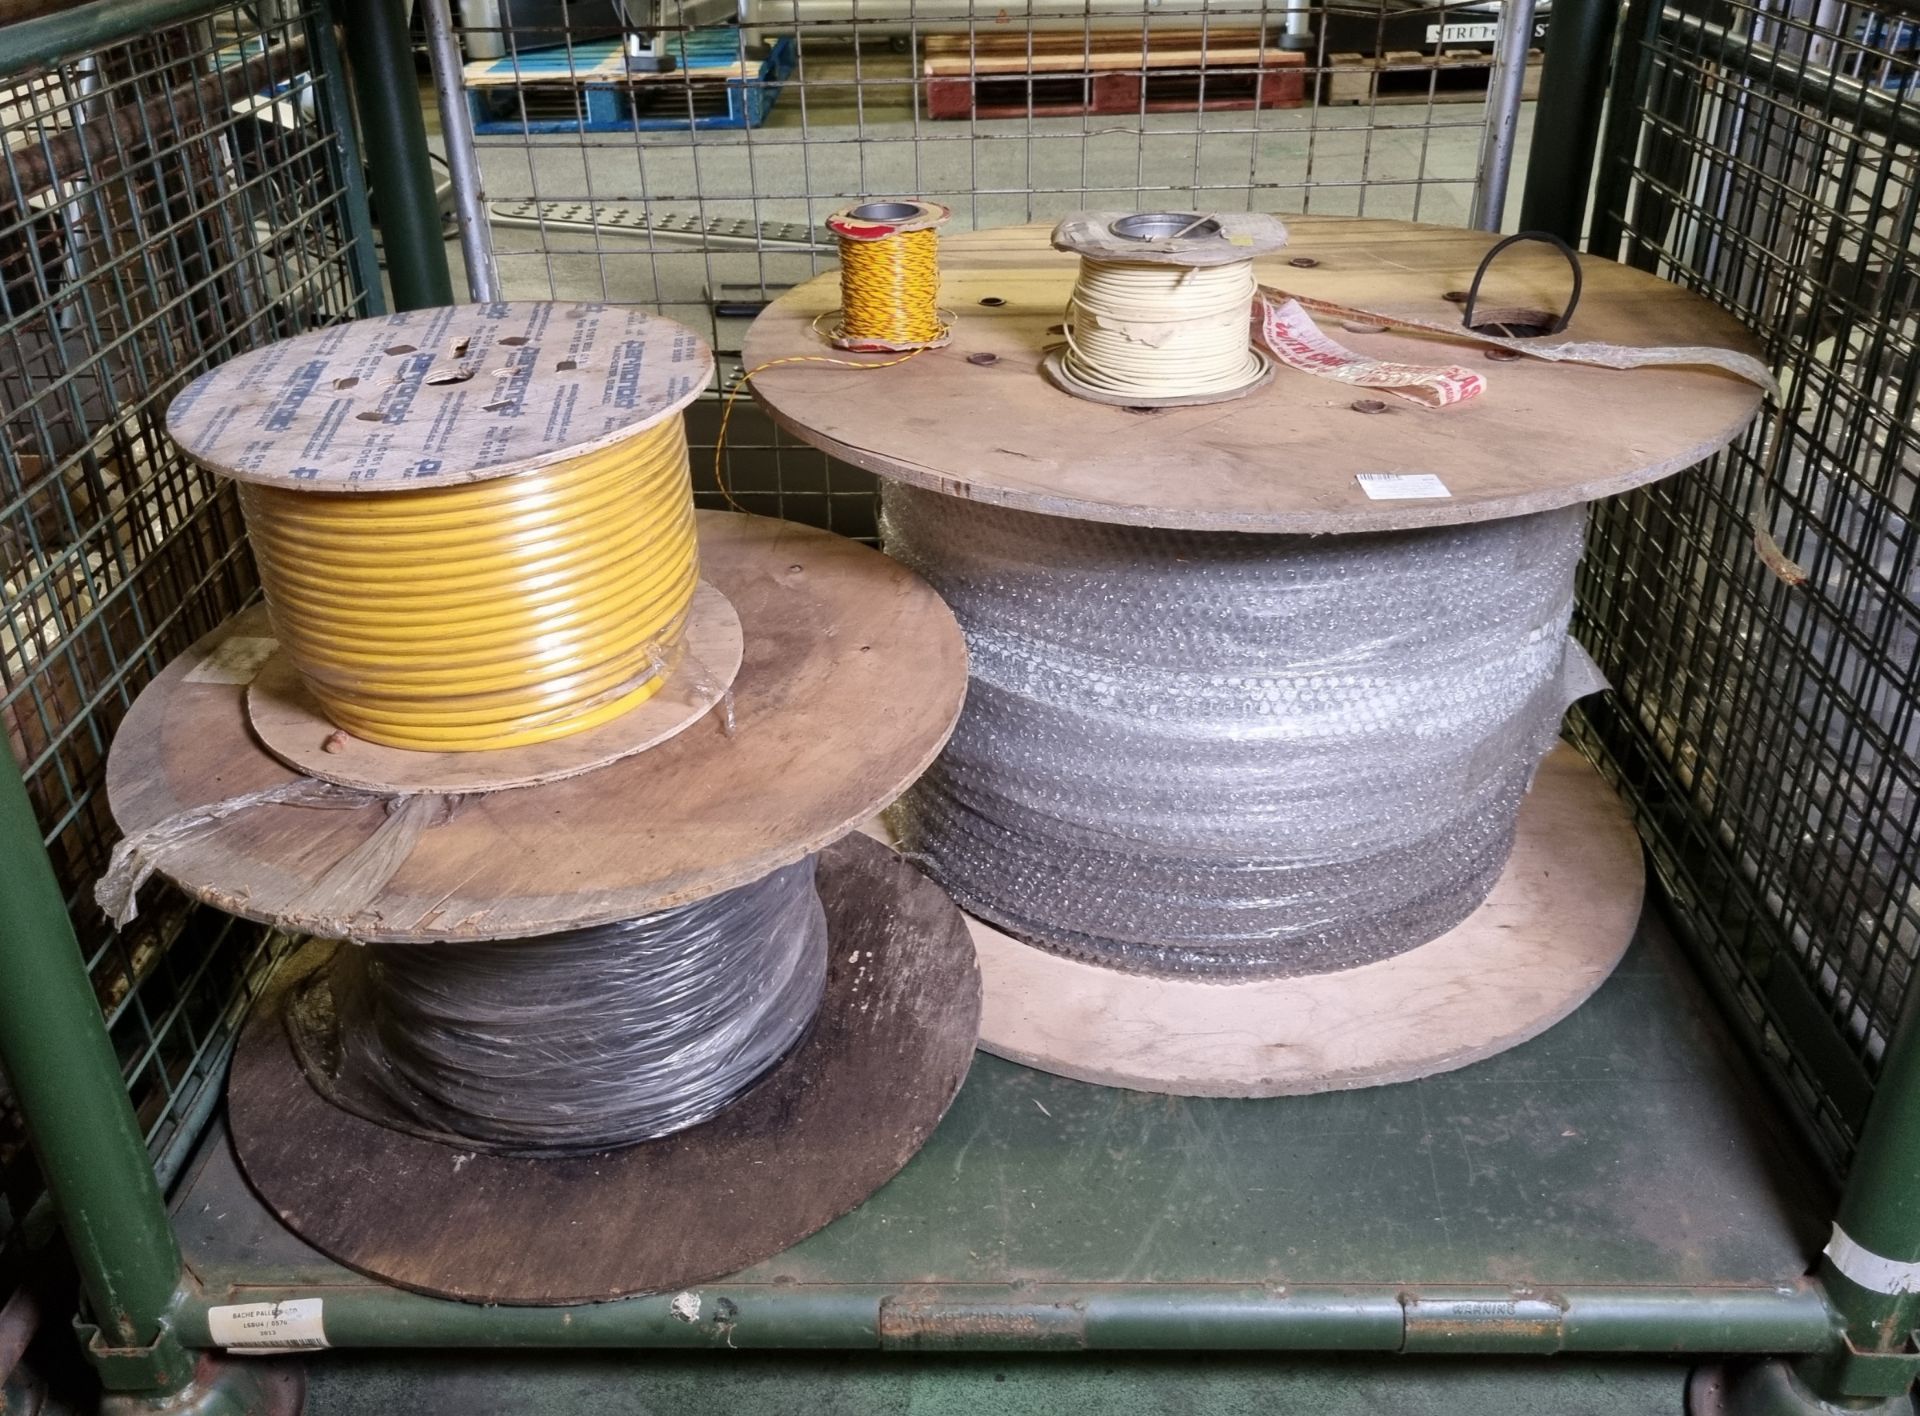 Belden excel om1 62.5/125 loose tube lszh fibre optic cables & various reels of electrical cables